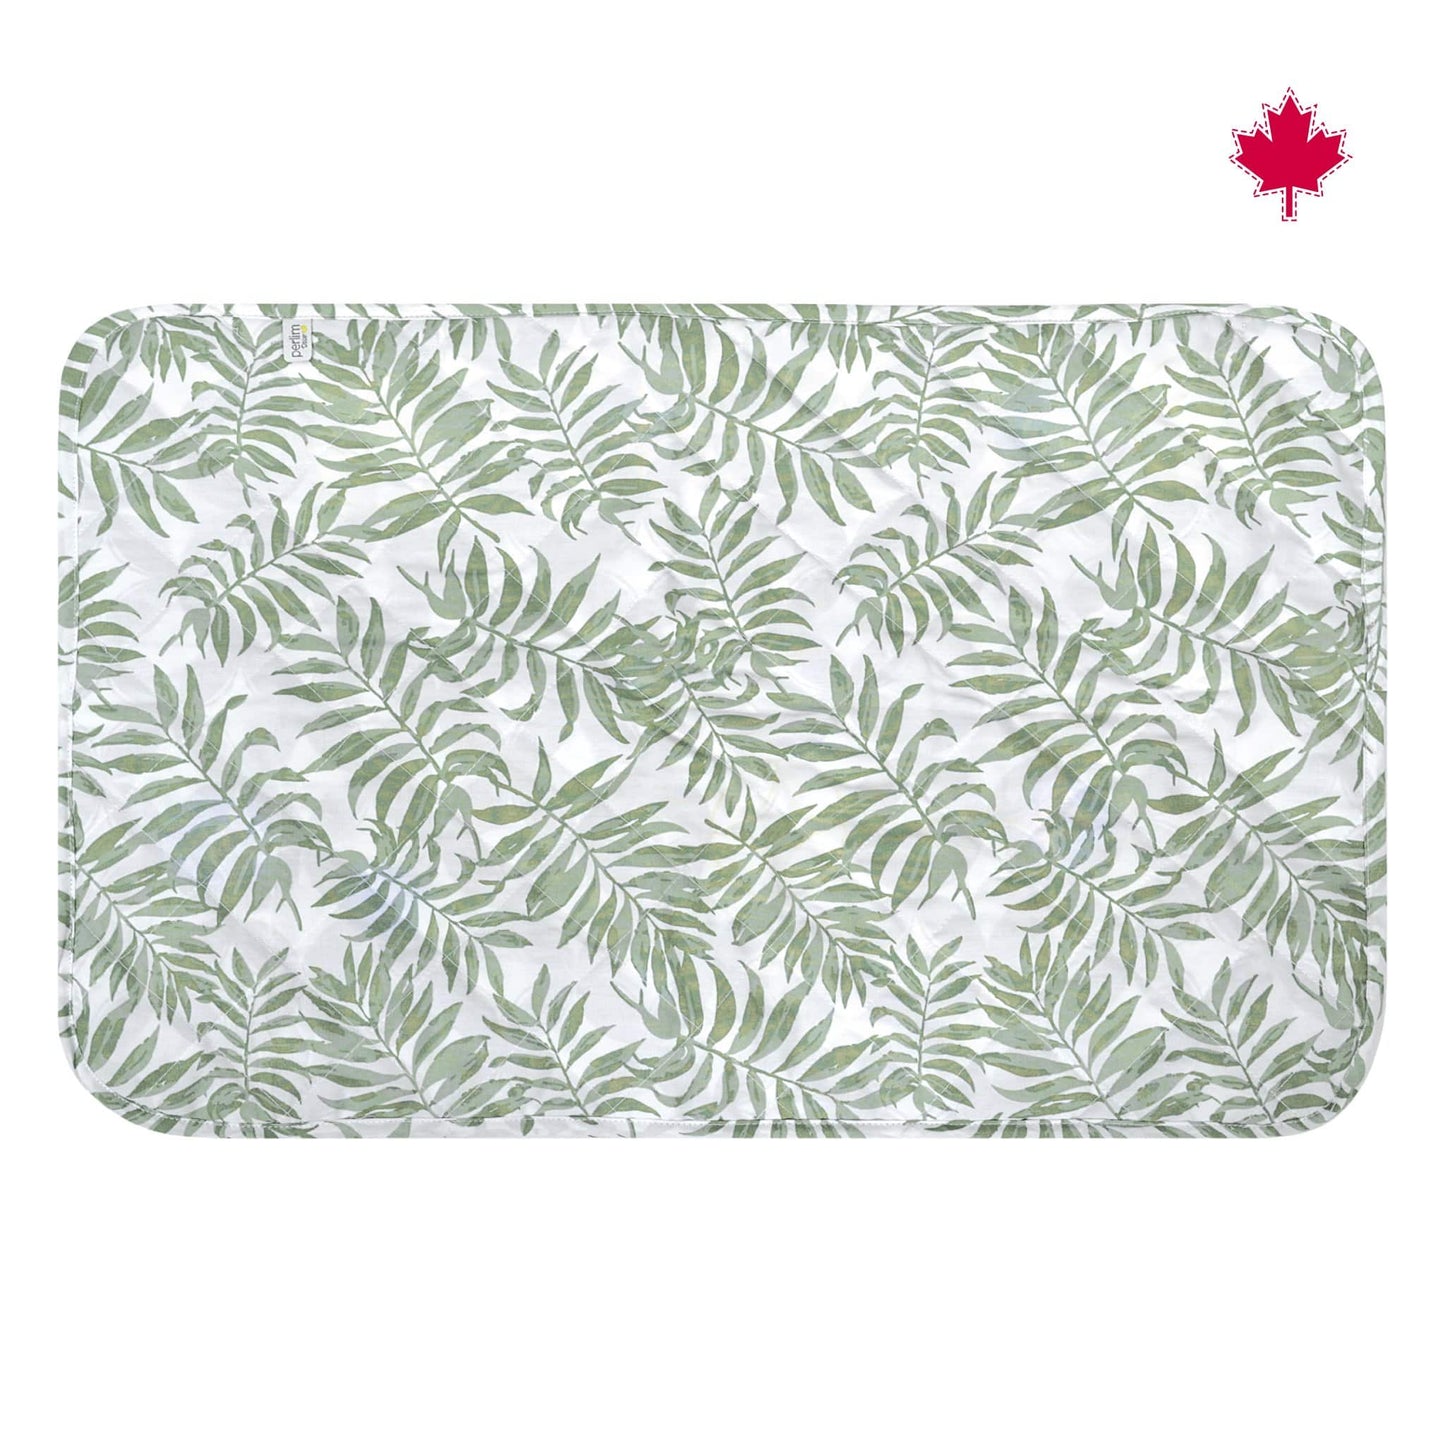 Waterproof Change Pad - Tropical Green (16x30 inches)